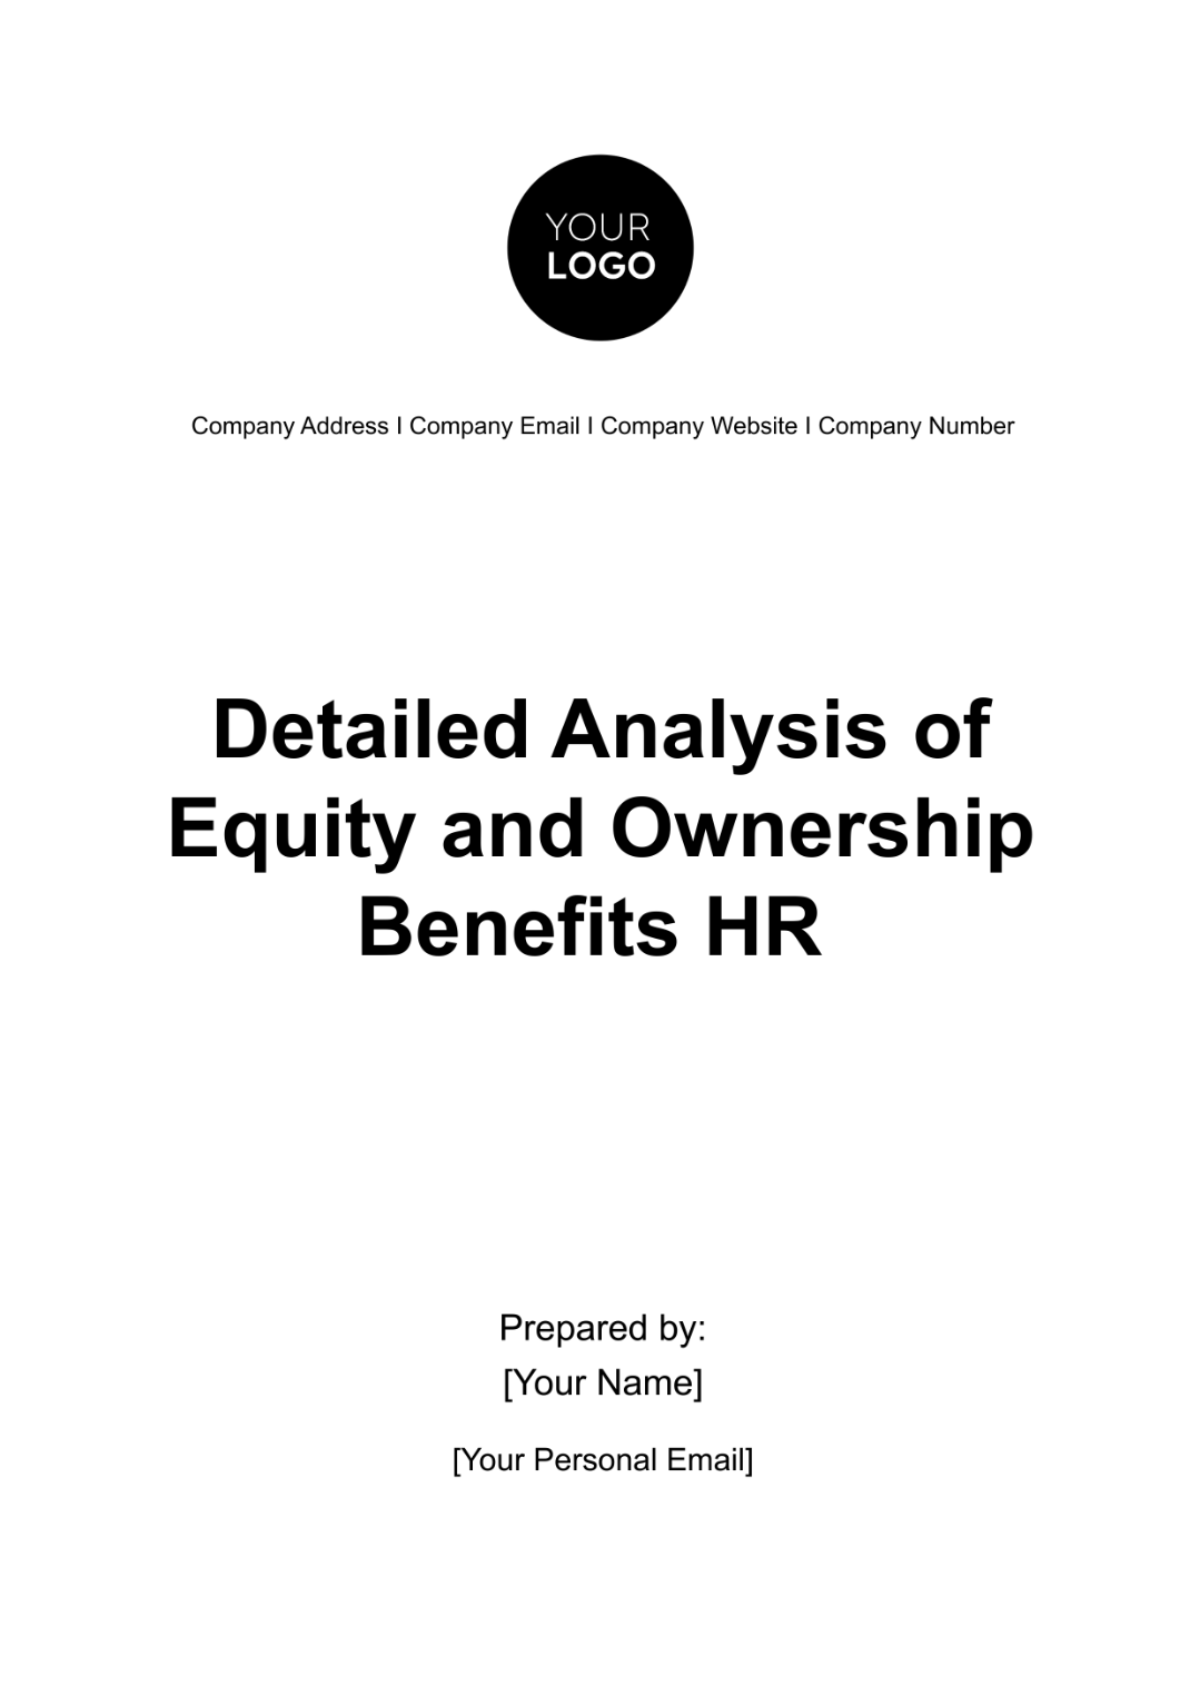 Free Detailed Analysis of Equity and Ownership Benefits HR Template